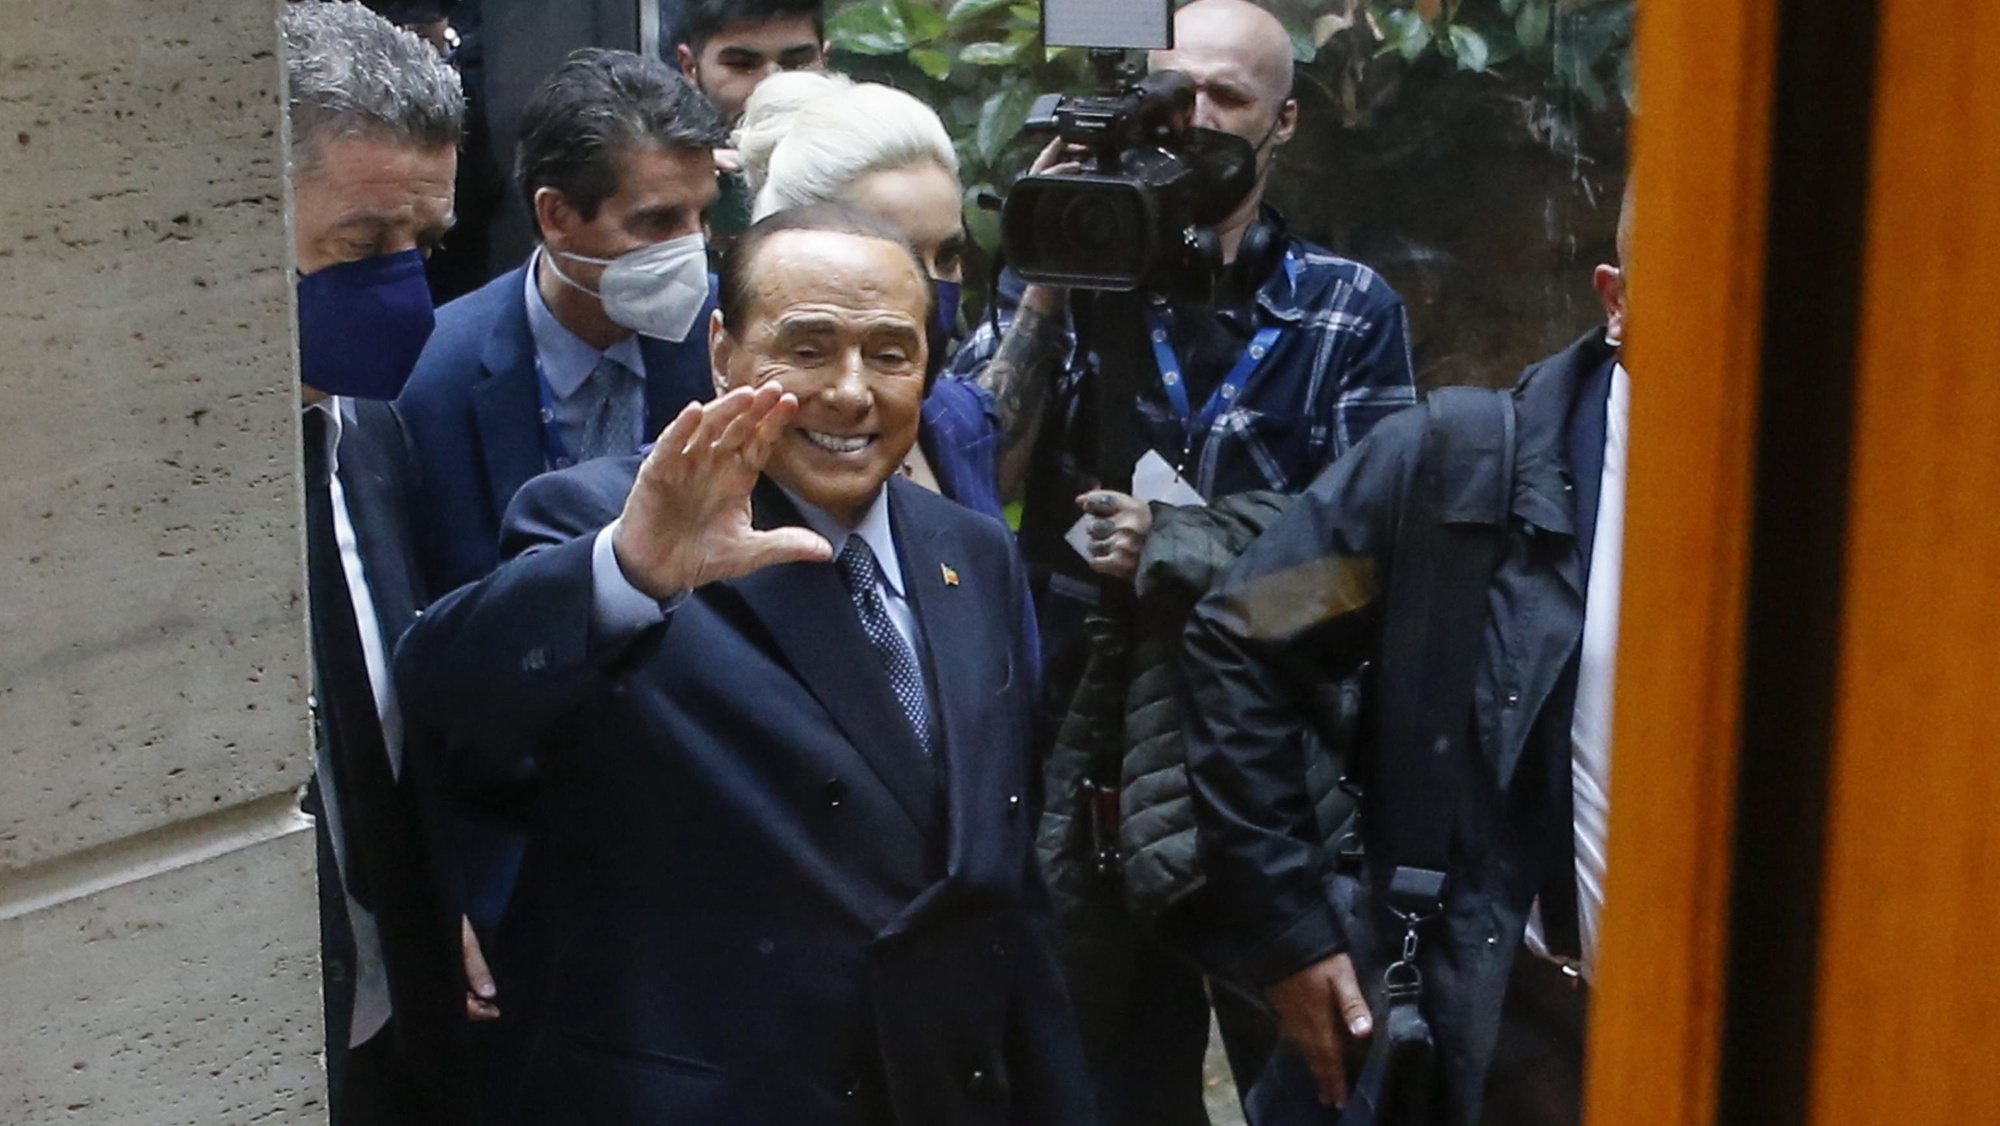 epa09880829 Former Italian Prime Minister and leader of the Forza Italia party Silvio Berlusconi attends a meeting with supporters at a rally in Rome, Italy, 09 April 2022.  EPA/FABIO FRUSTACI